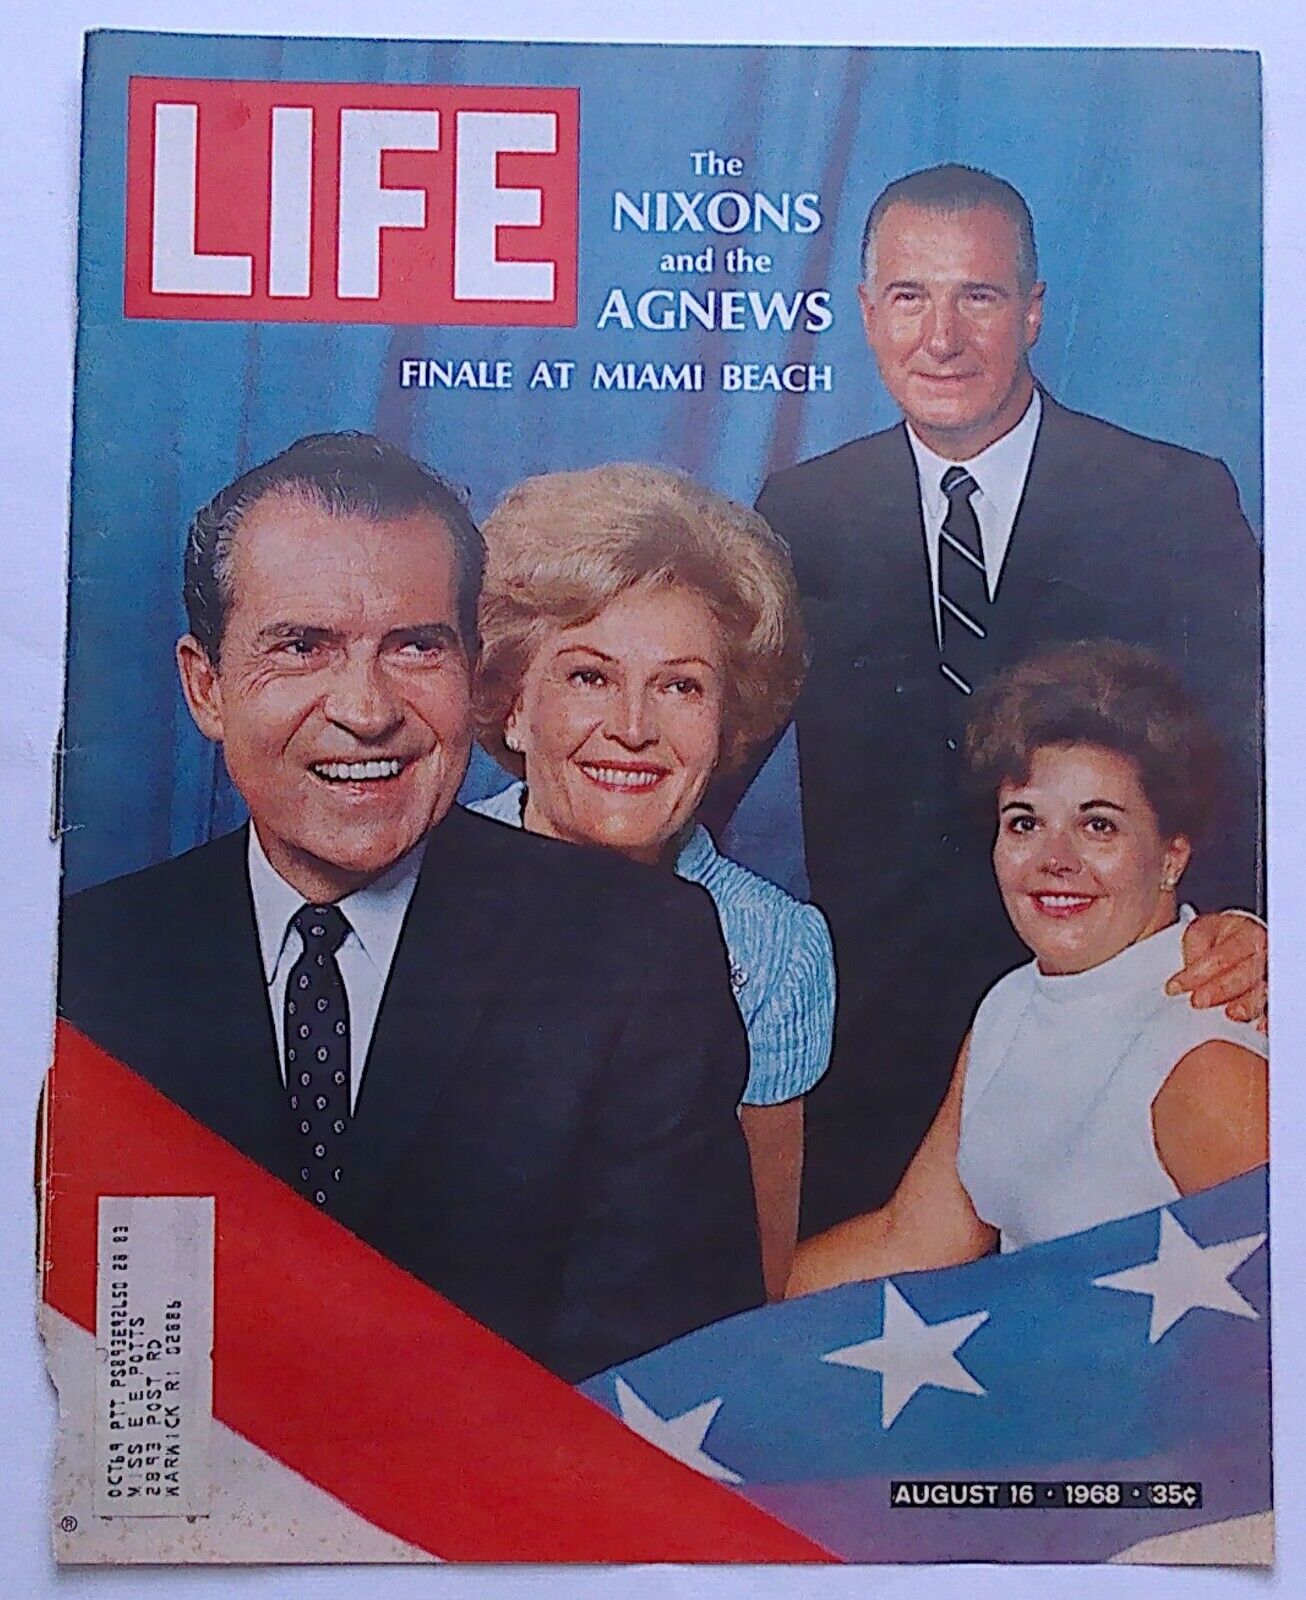 Life Magazine Cover Only  ( The Nixons and the Agnews ) August 16, 1968